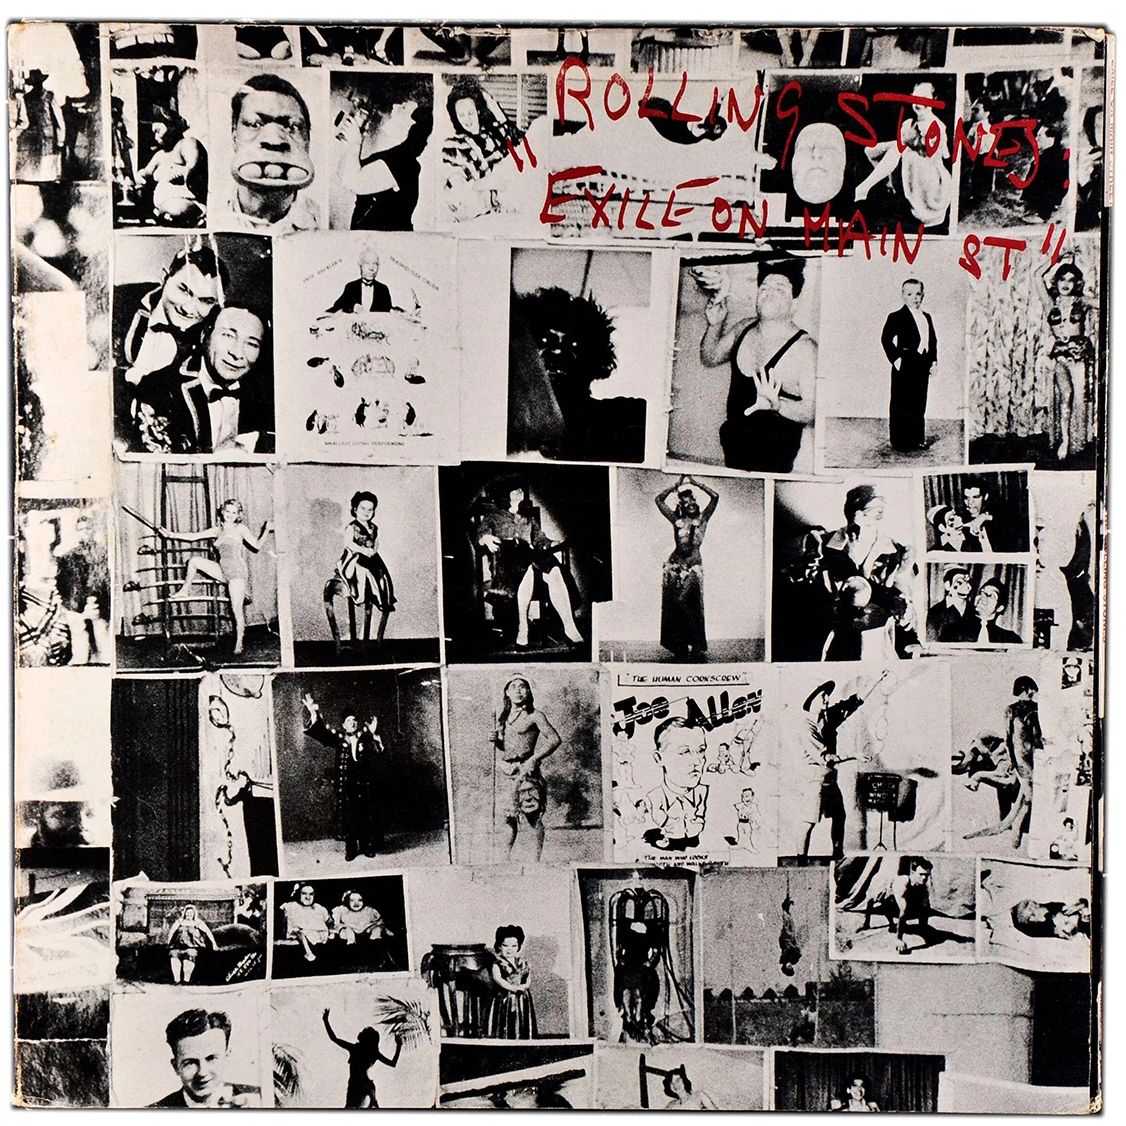 The Rolling Stones album cover for Exile on Main St